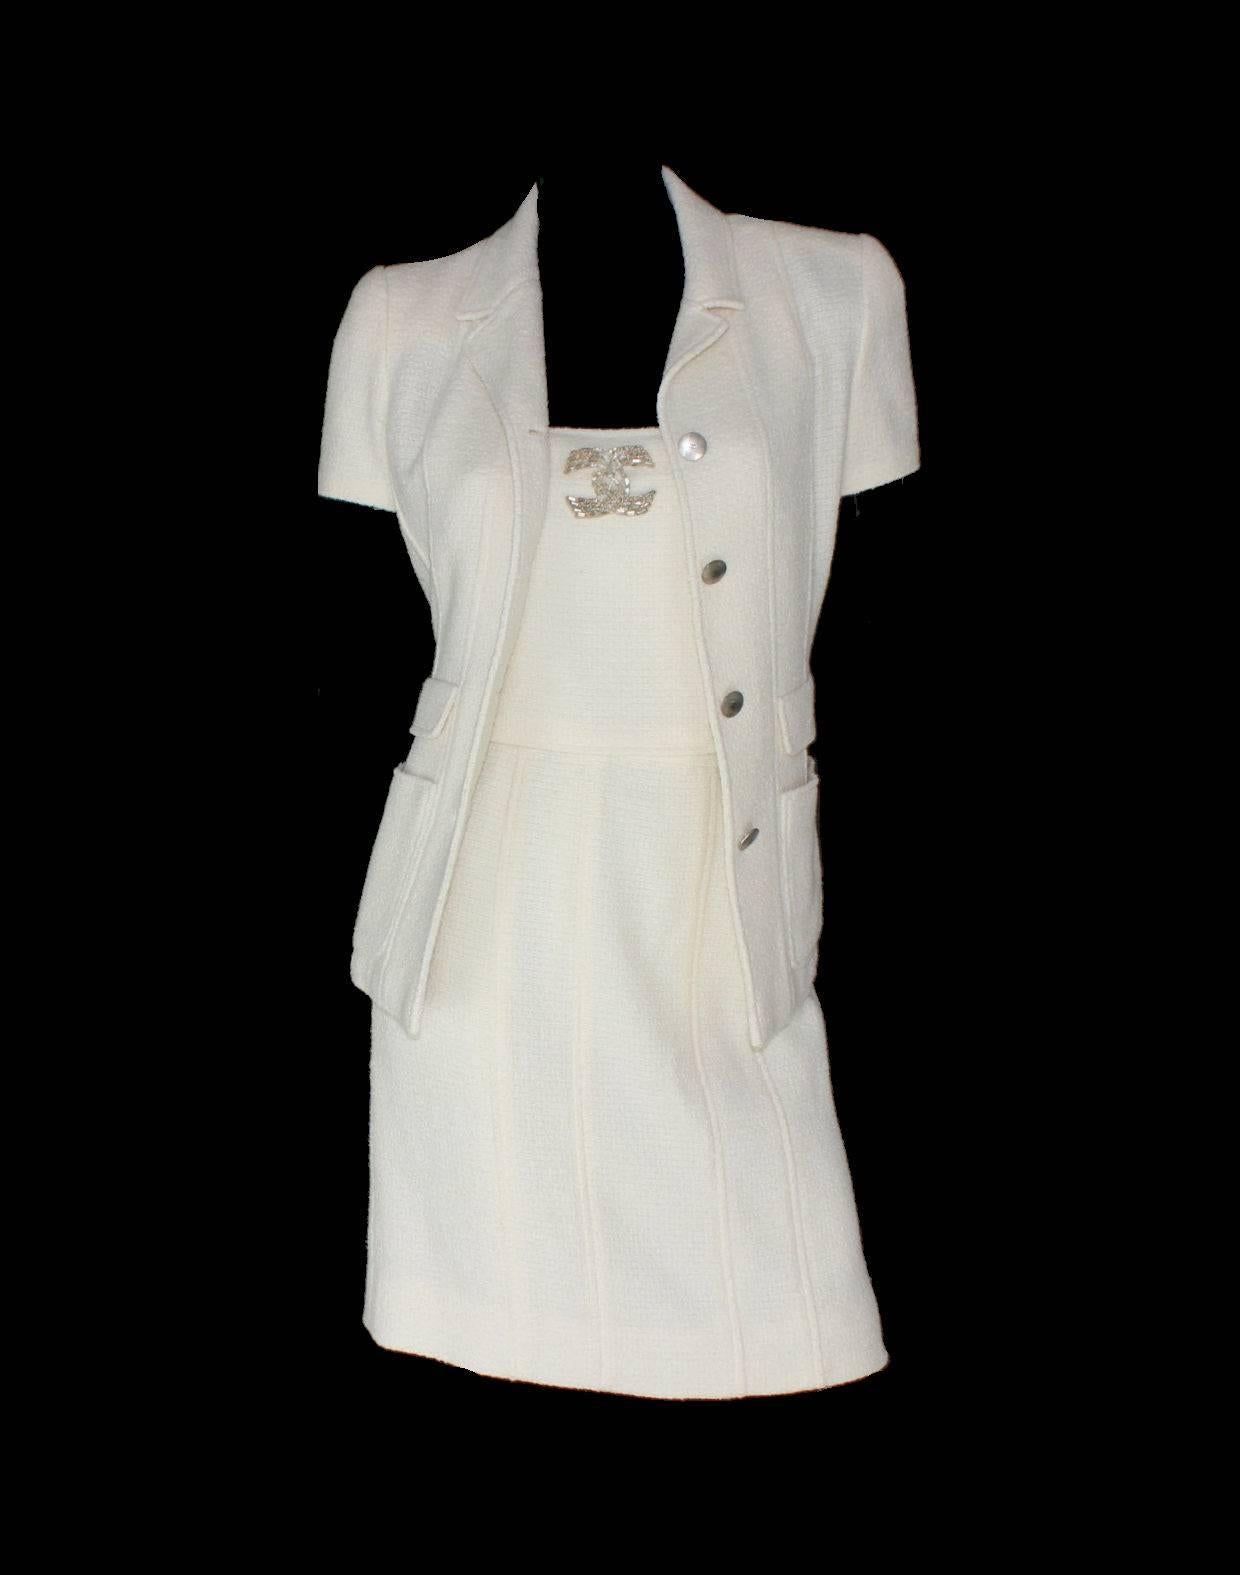 Beautiful Chanel Signature ensemble
Consisting of three pieces - jacket, skirt and corset top
So versatile - can be worn as a complete outfit (dress / skirt suit) or each piece by itself
A very versatile ensemble that lasts for many years
The suit's